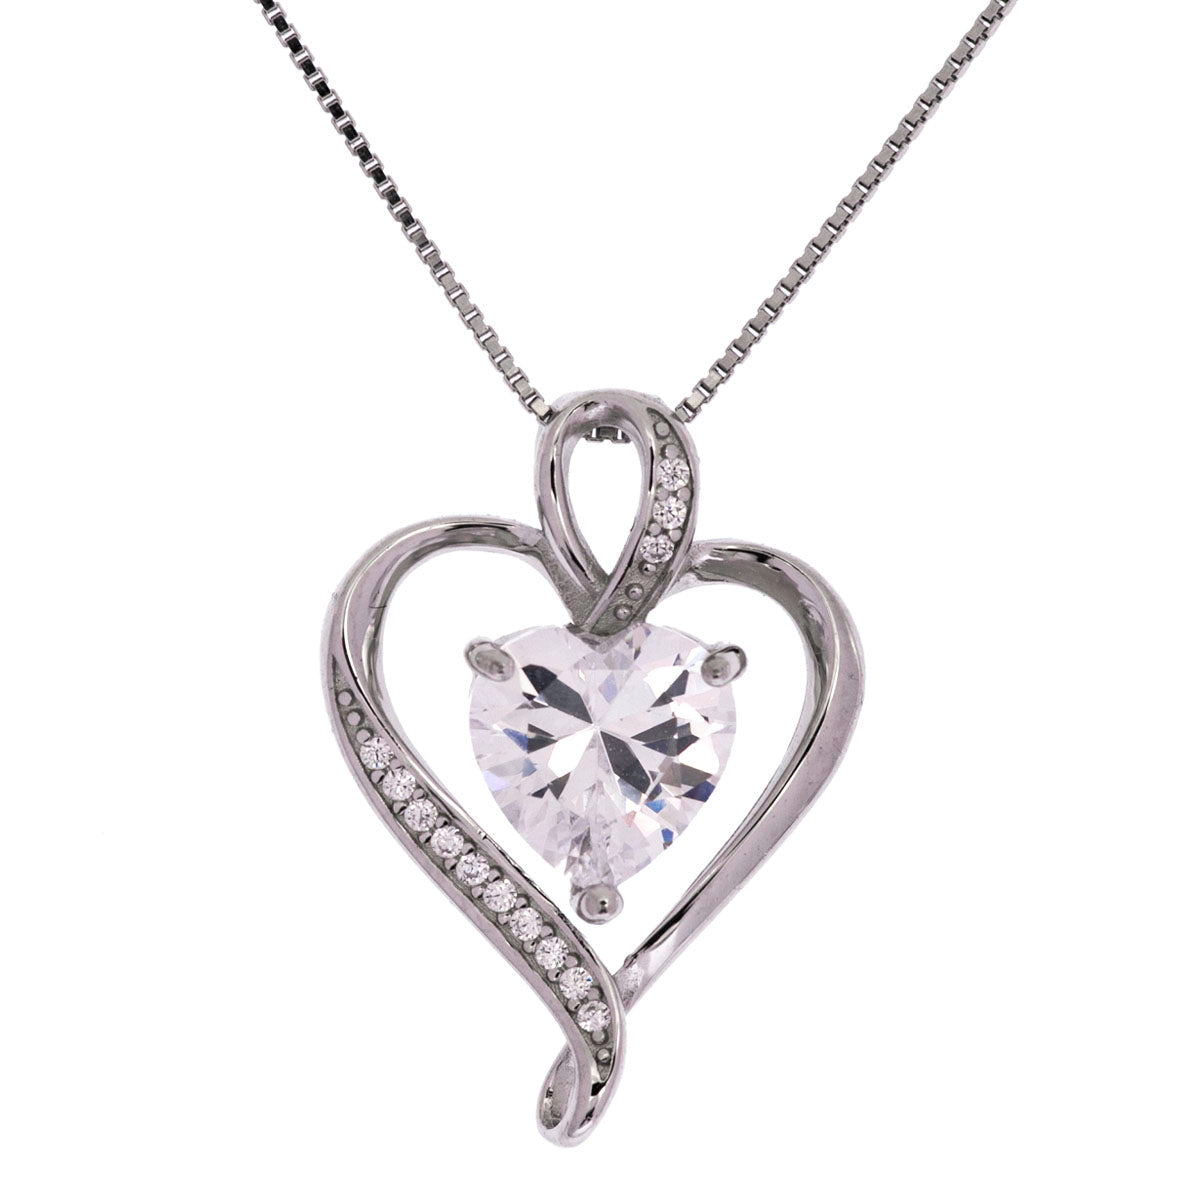 Straighten Your Crown Ribbon Heart Silver Necklace - Soulmate